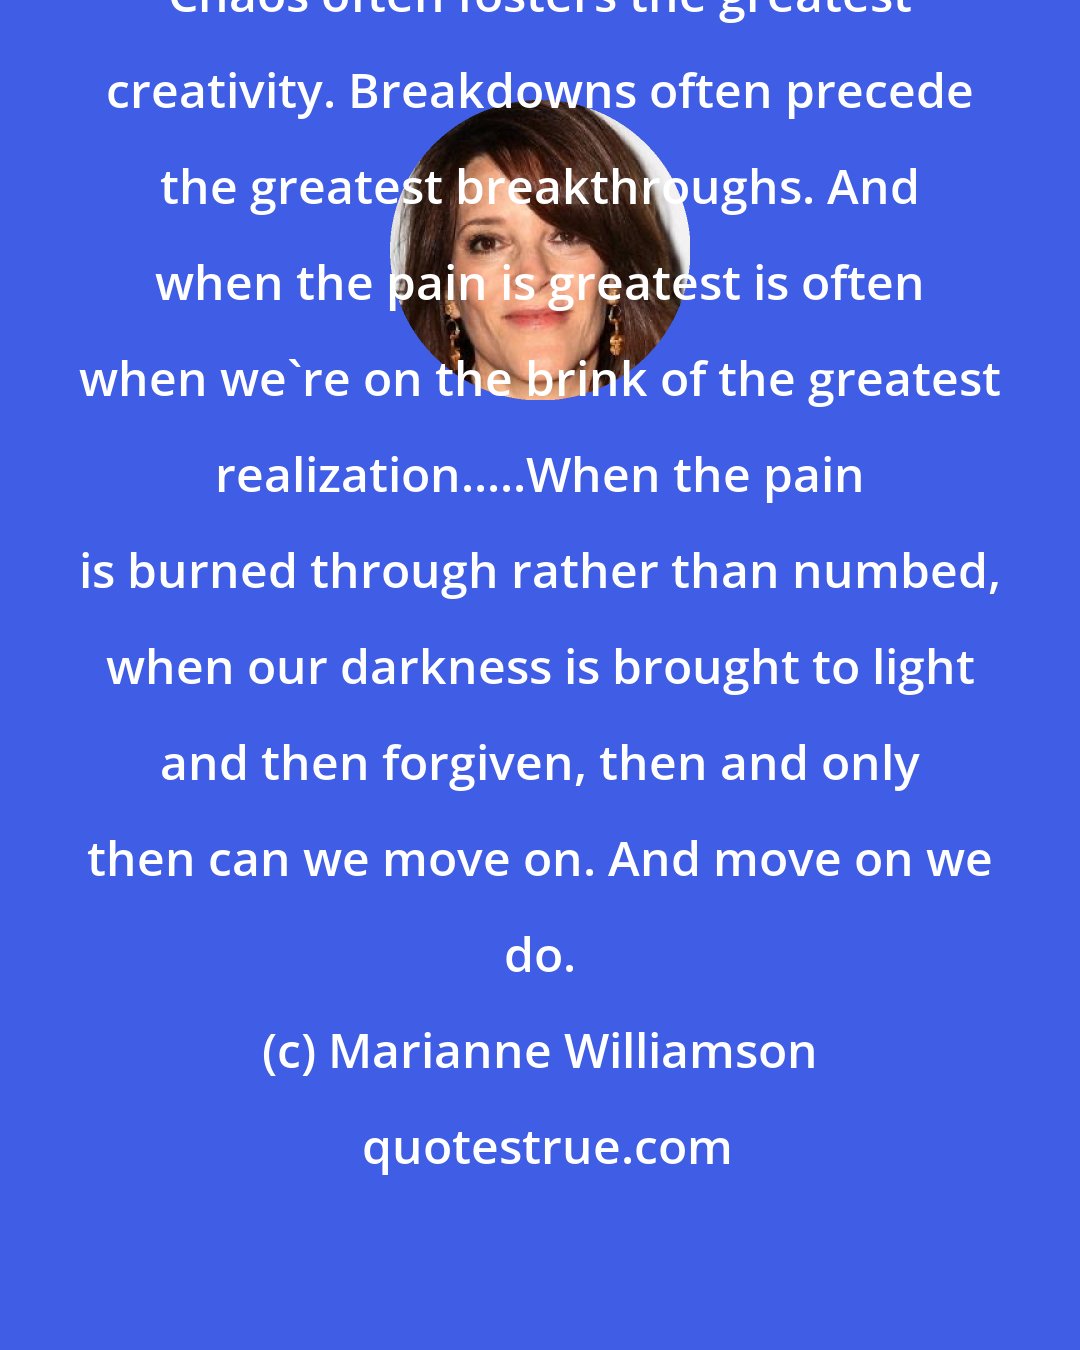 Marianne Williamson: Chaos often fosters the greatest creativity. Breakdowns often precede the greatest breakthroughs. And when the pain is greatest is often when we're on the brink of the greatest realization.....When the pain is burned through rather than numbed, when our darkness is brought to light and then forgiven, then and only then can we move on. And move on we do.